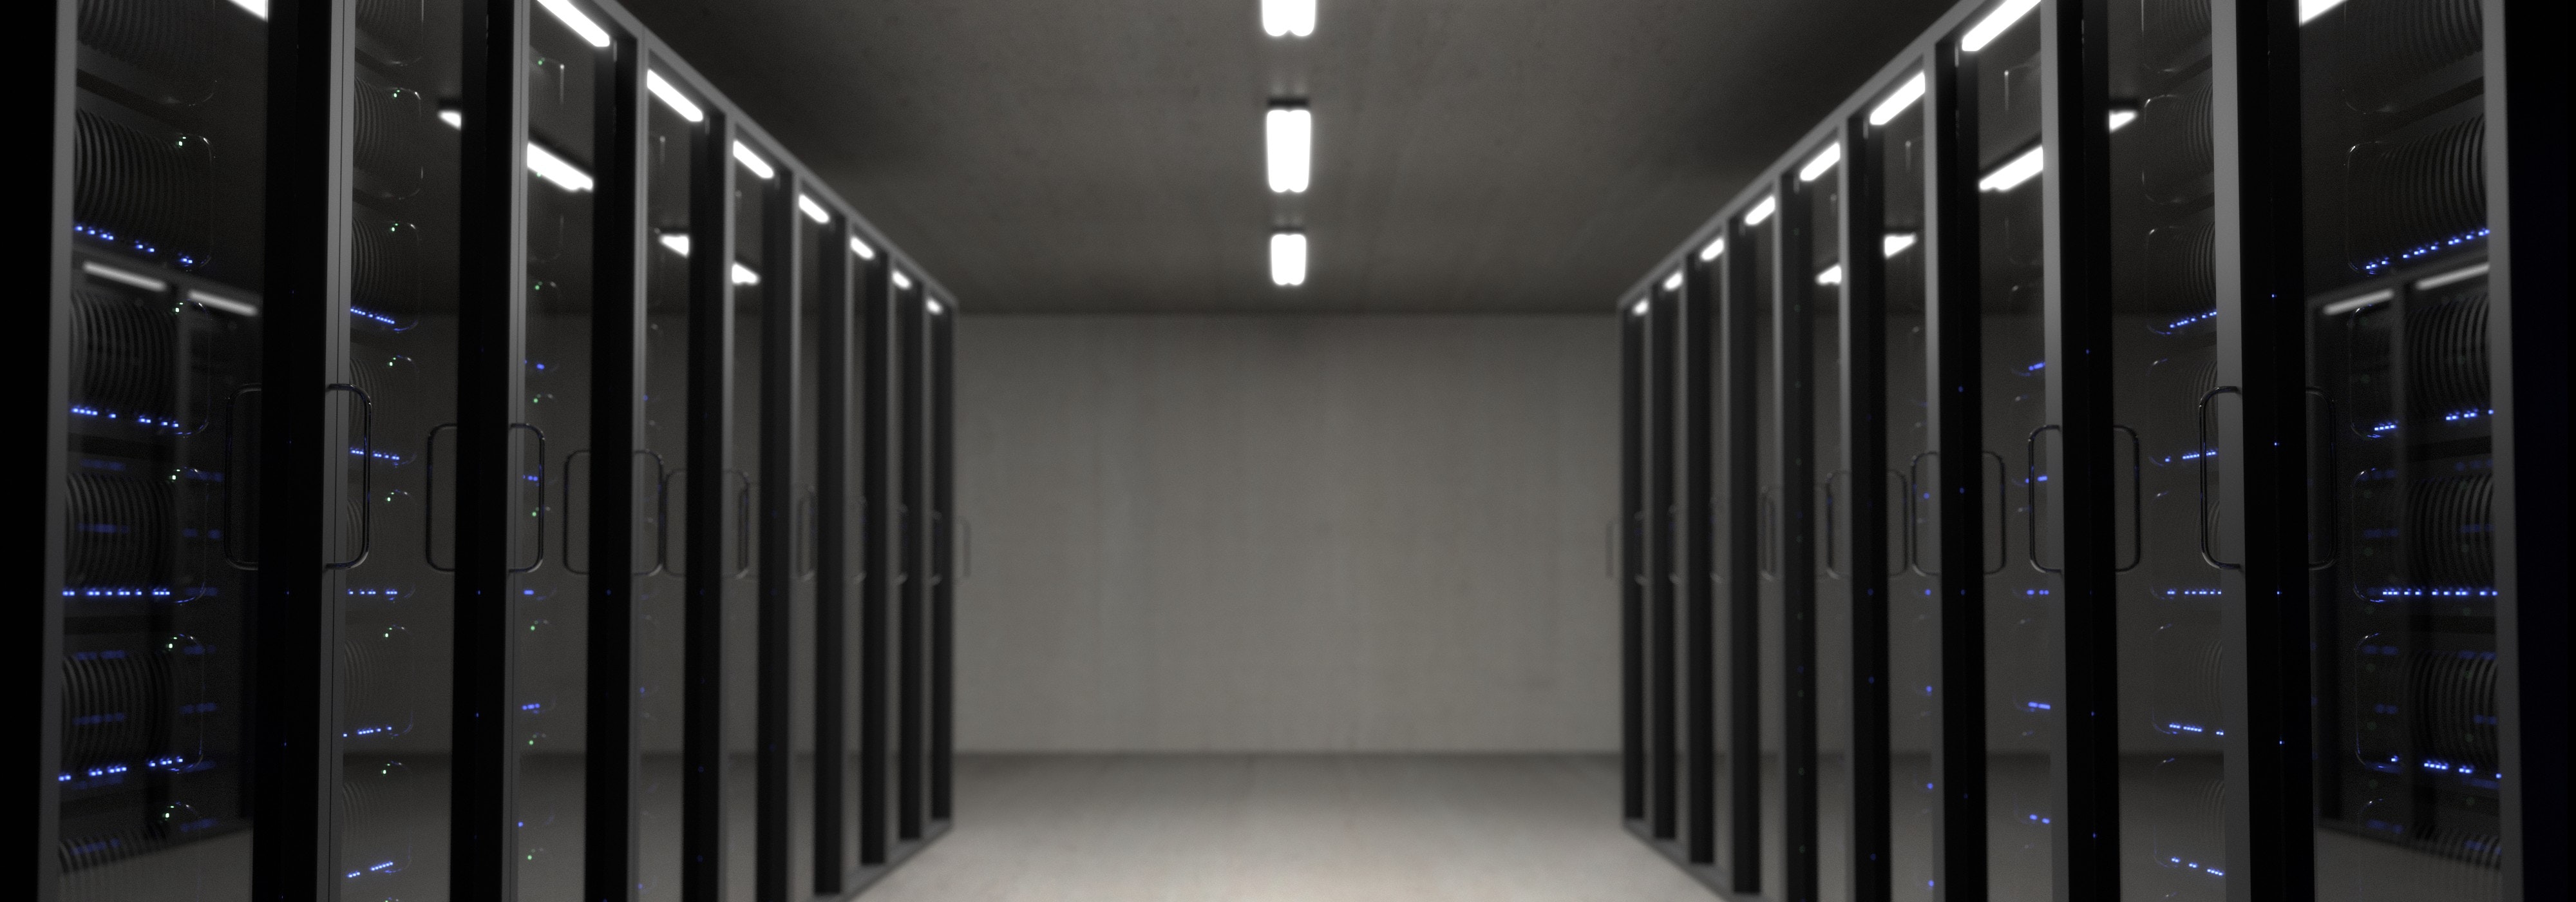 Server room photos download the best free server room stock photos hd images